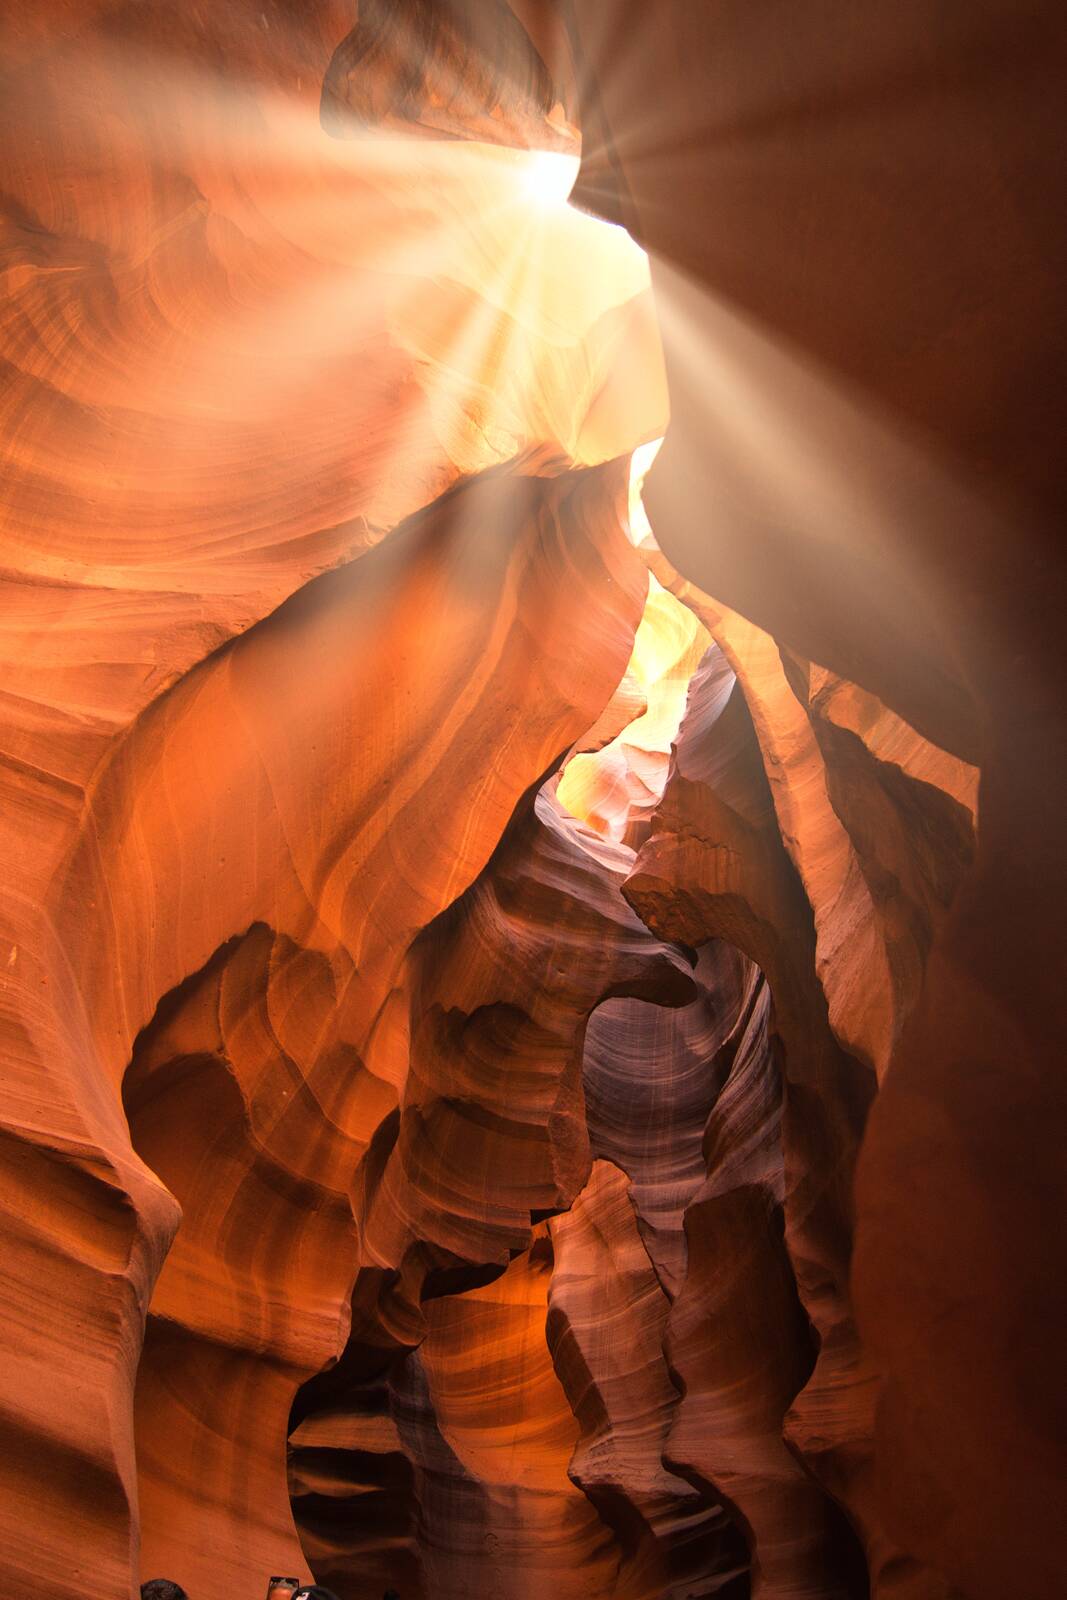 Image of Upper Antelope Canyon by Steve West